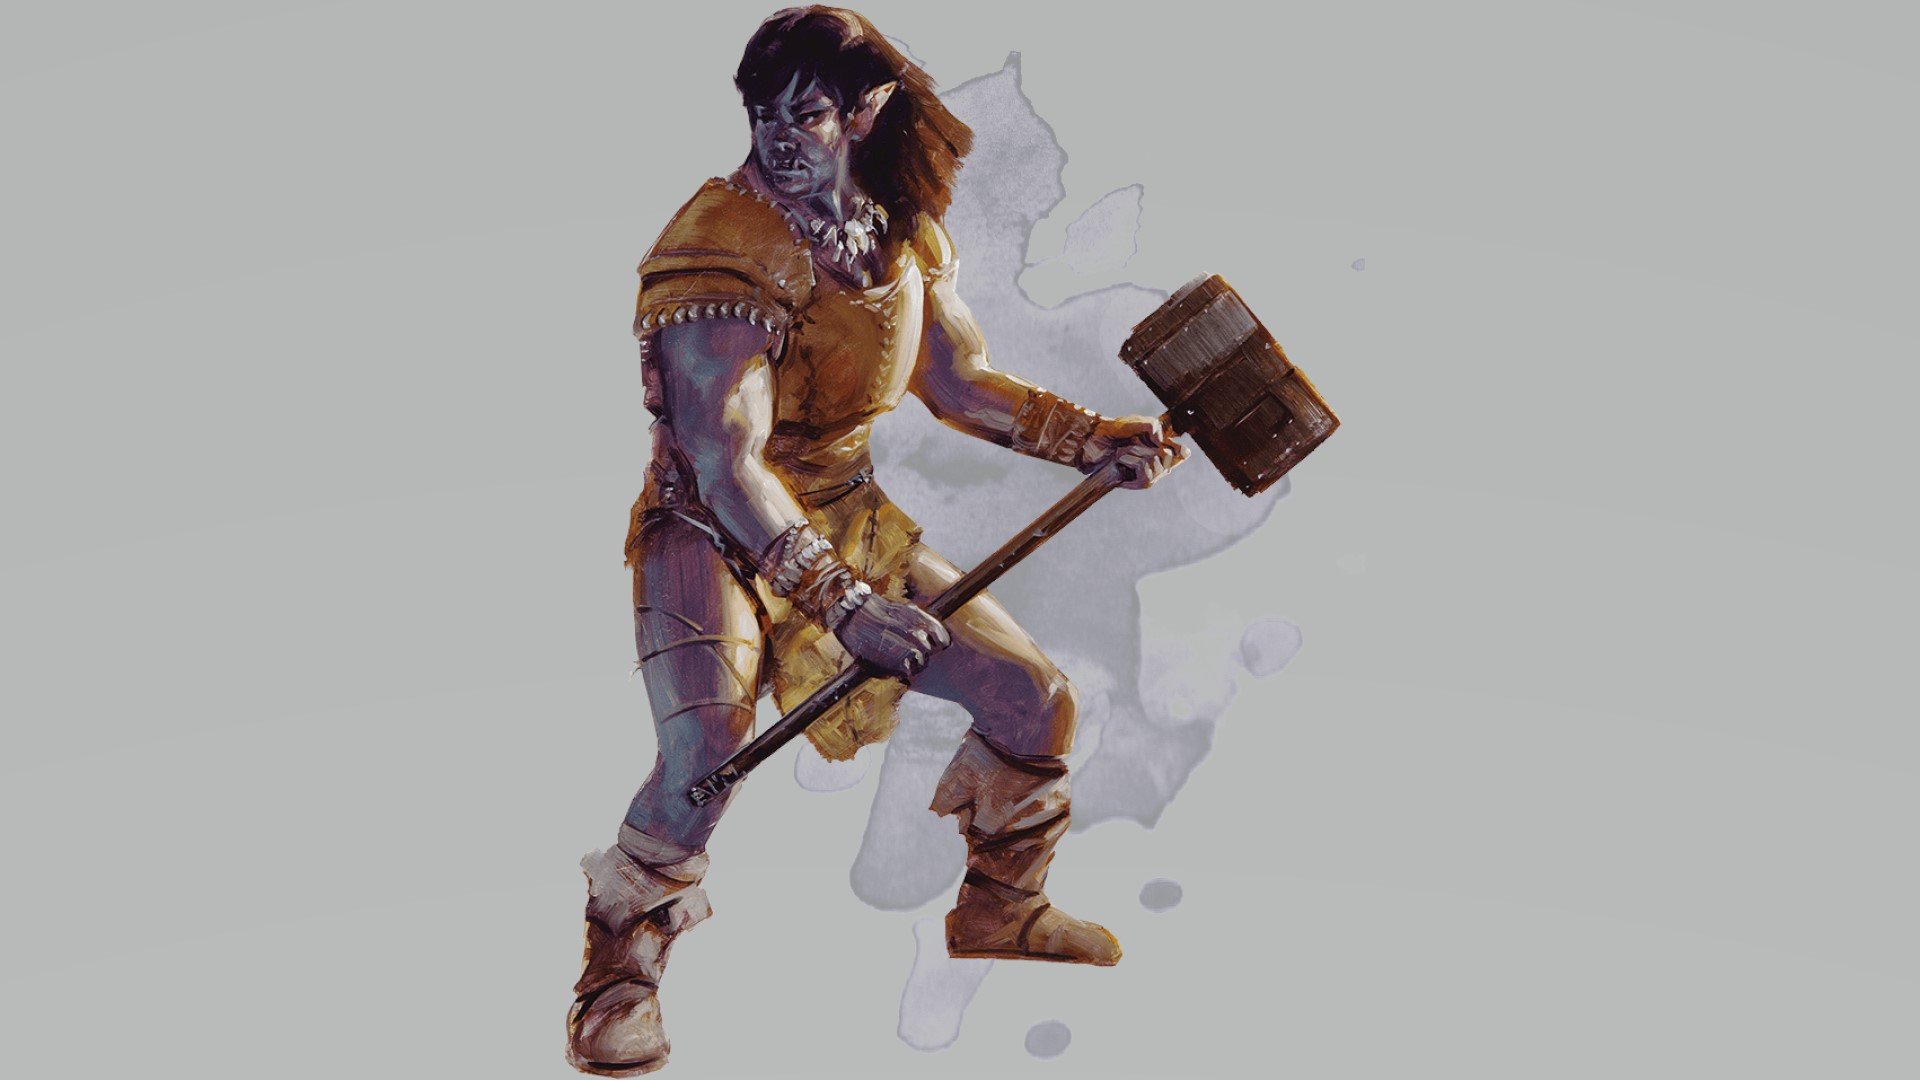 DnD Barbarian 5E class guide - Wizards of the Coast artwork showing a half-orc barbarian with a maul